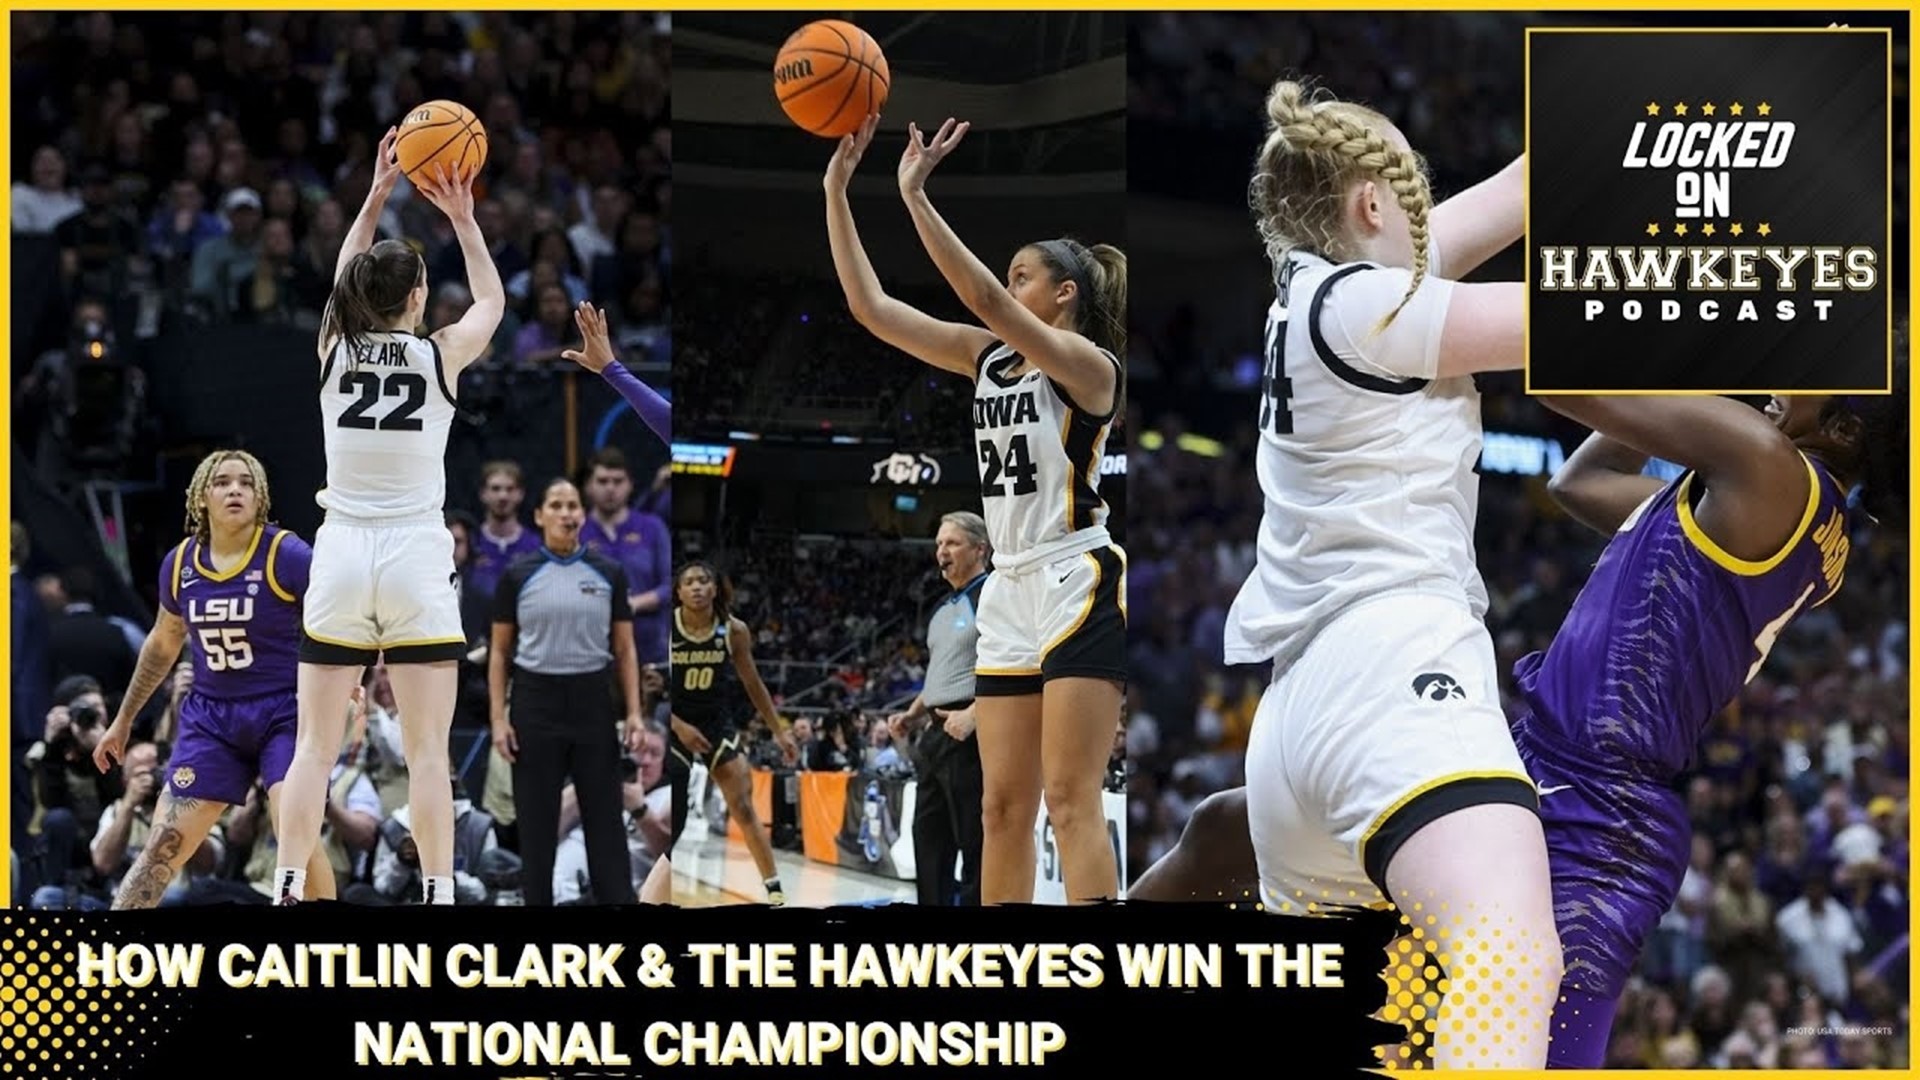 Trent Condon continues the big breakdown of the Women's Final Four on the latest Locked on Hawkeyes podcast.